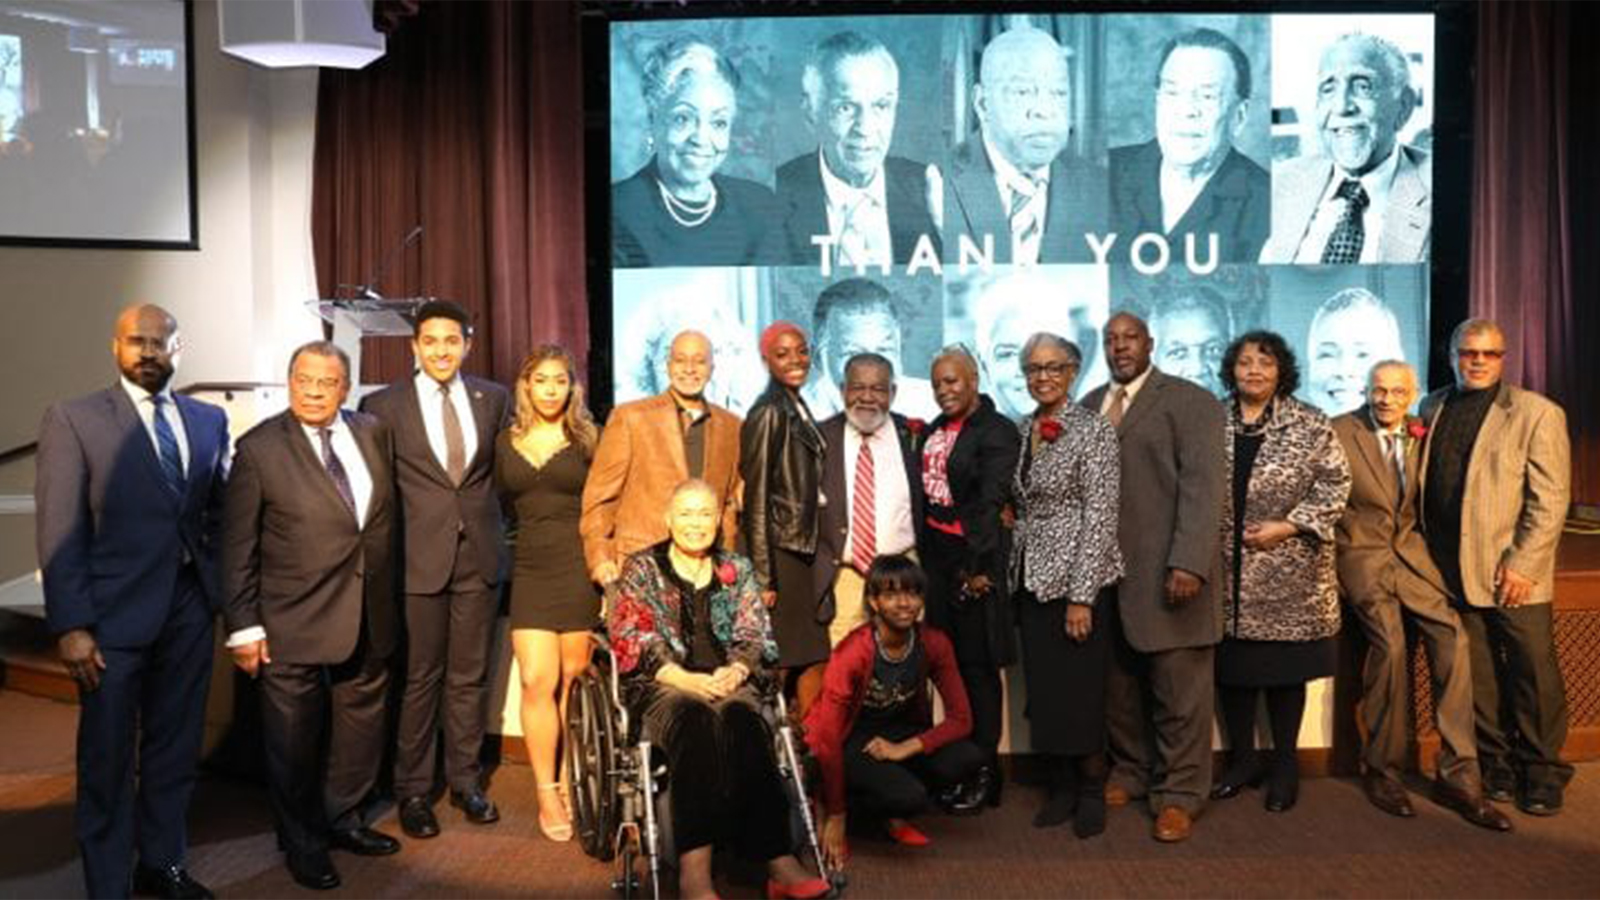 Comcast honoring and celebrating Civil Rights icons at its Voices of the Civil Rights event in Atlanta.